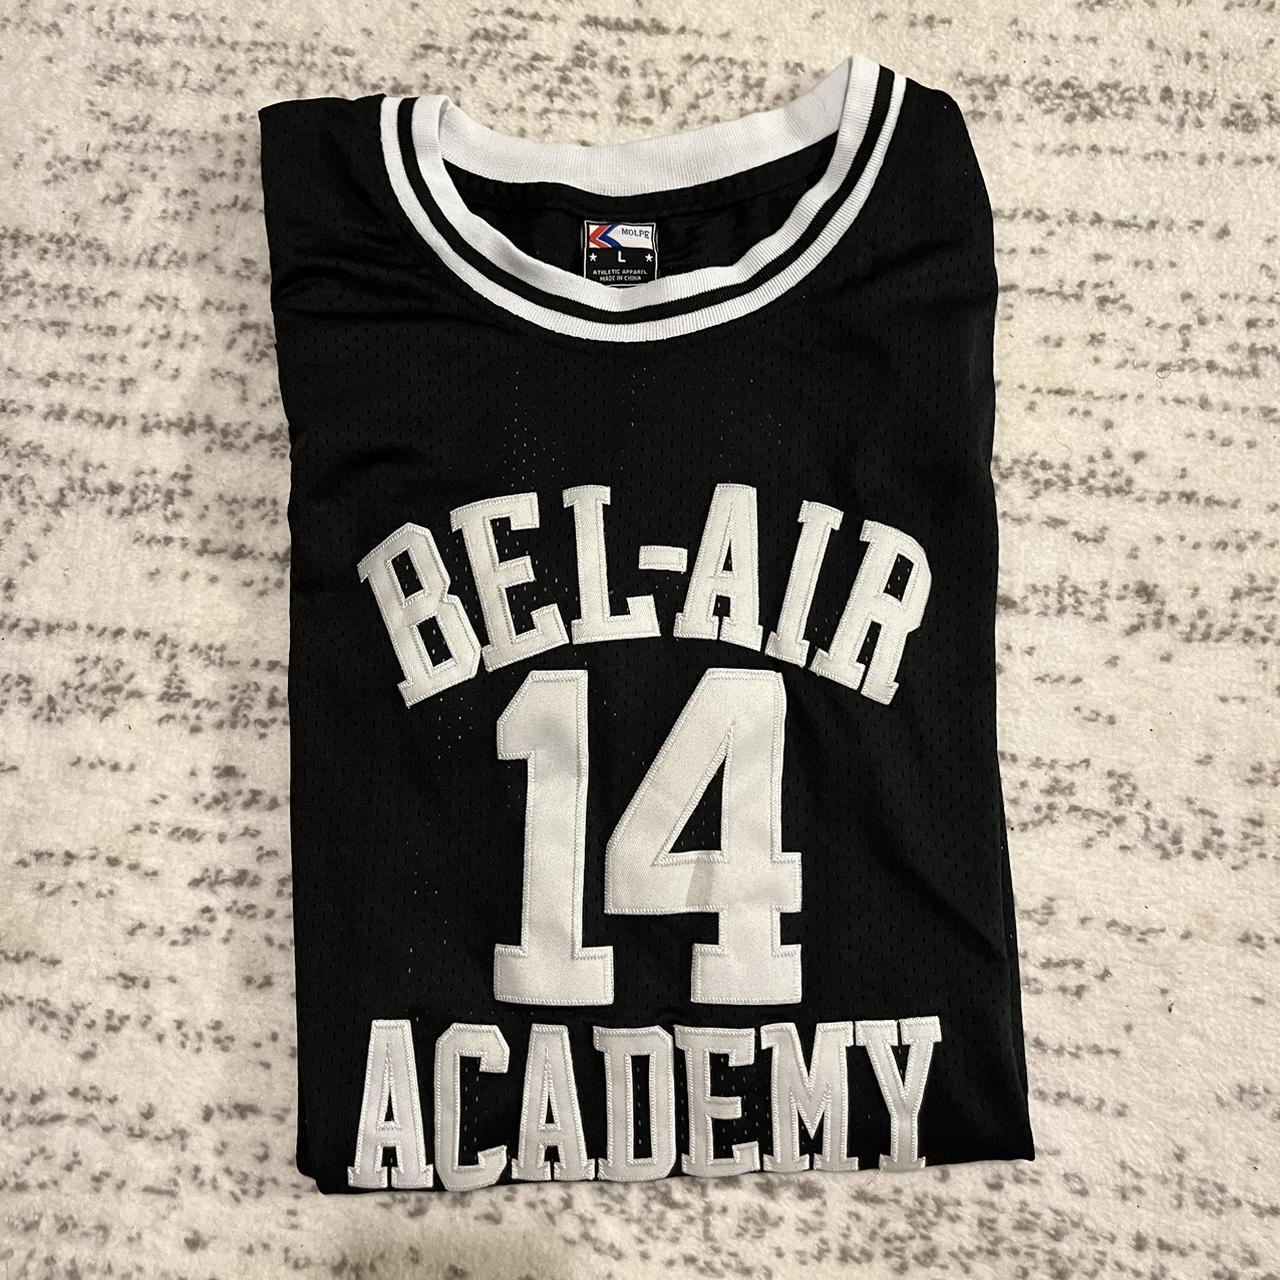 bel air will smith jersey